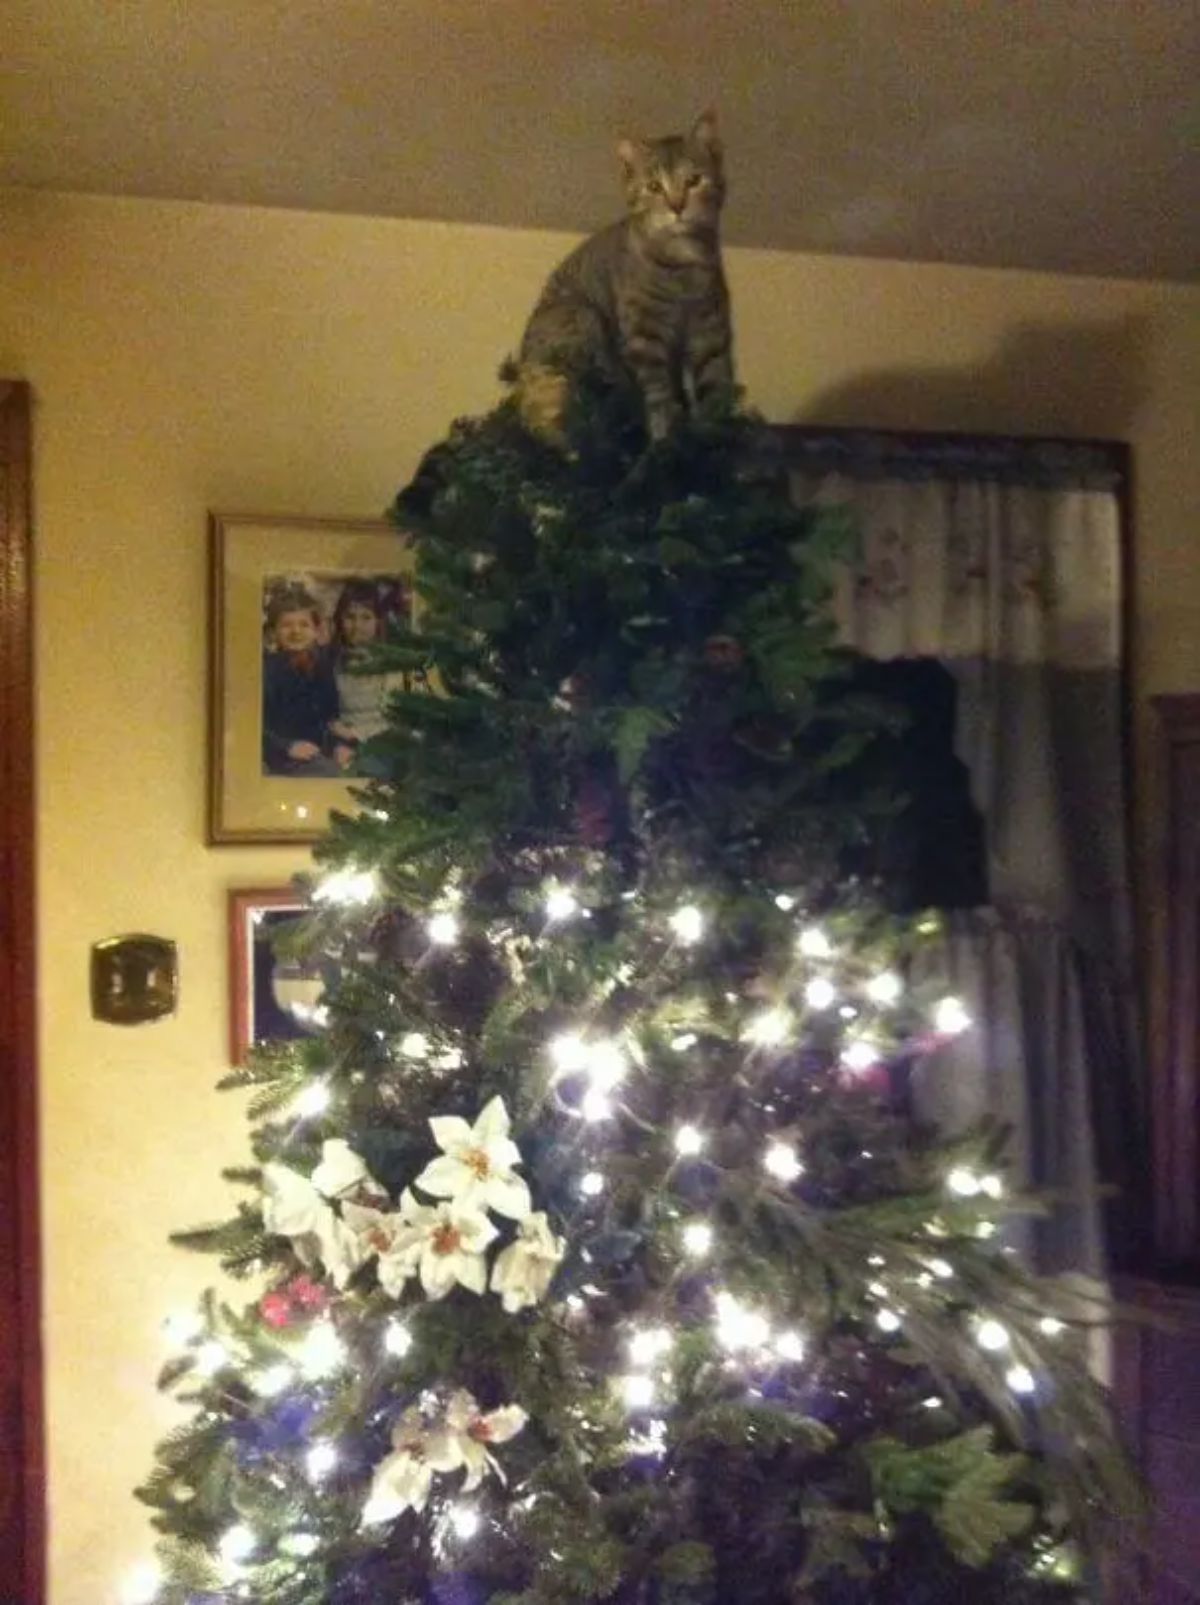 grey tabby cat sitting at the top of a christmas tree